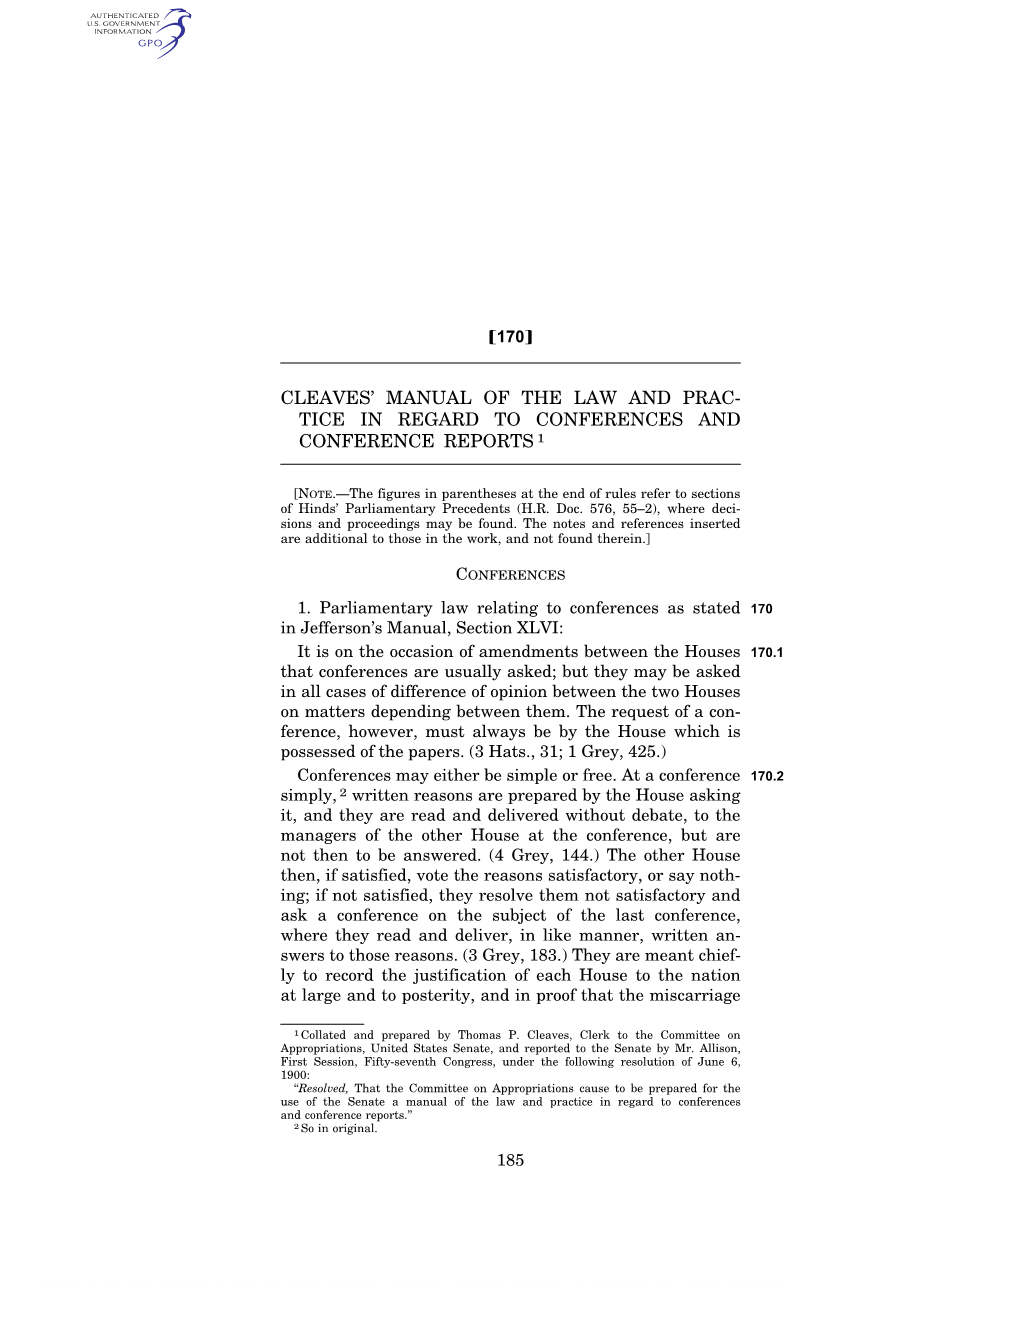 Cleaves' Manual of the Law and Prac- Tice in Regard To